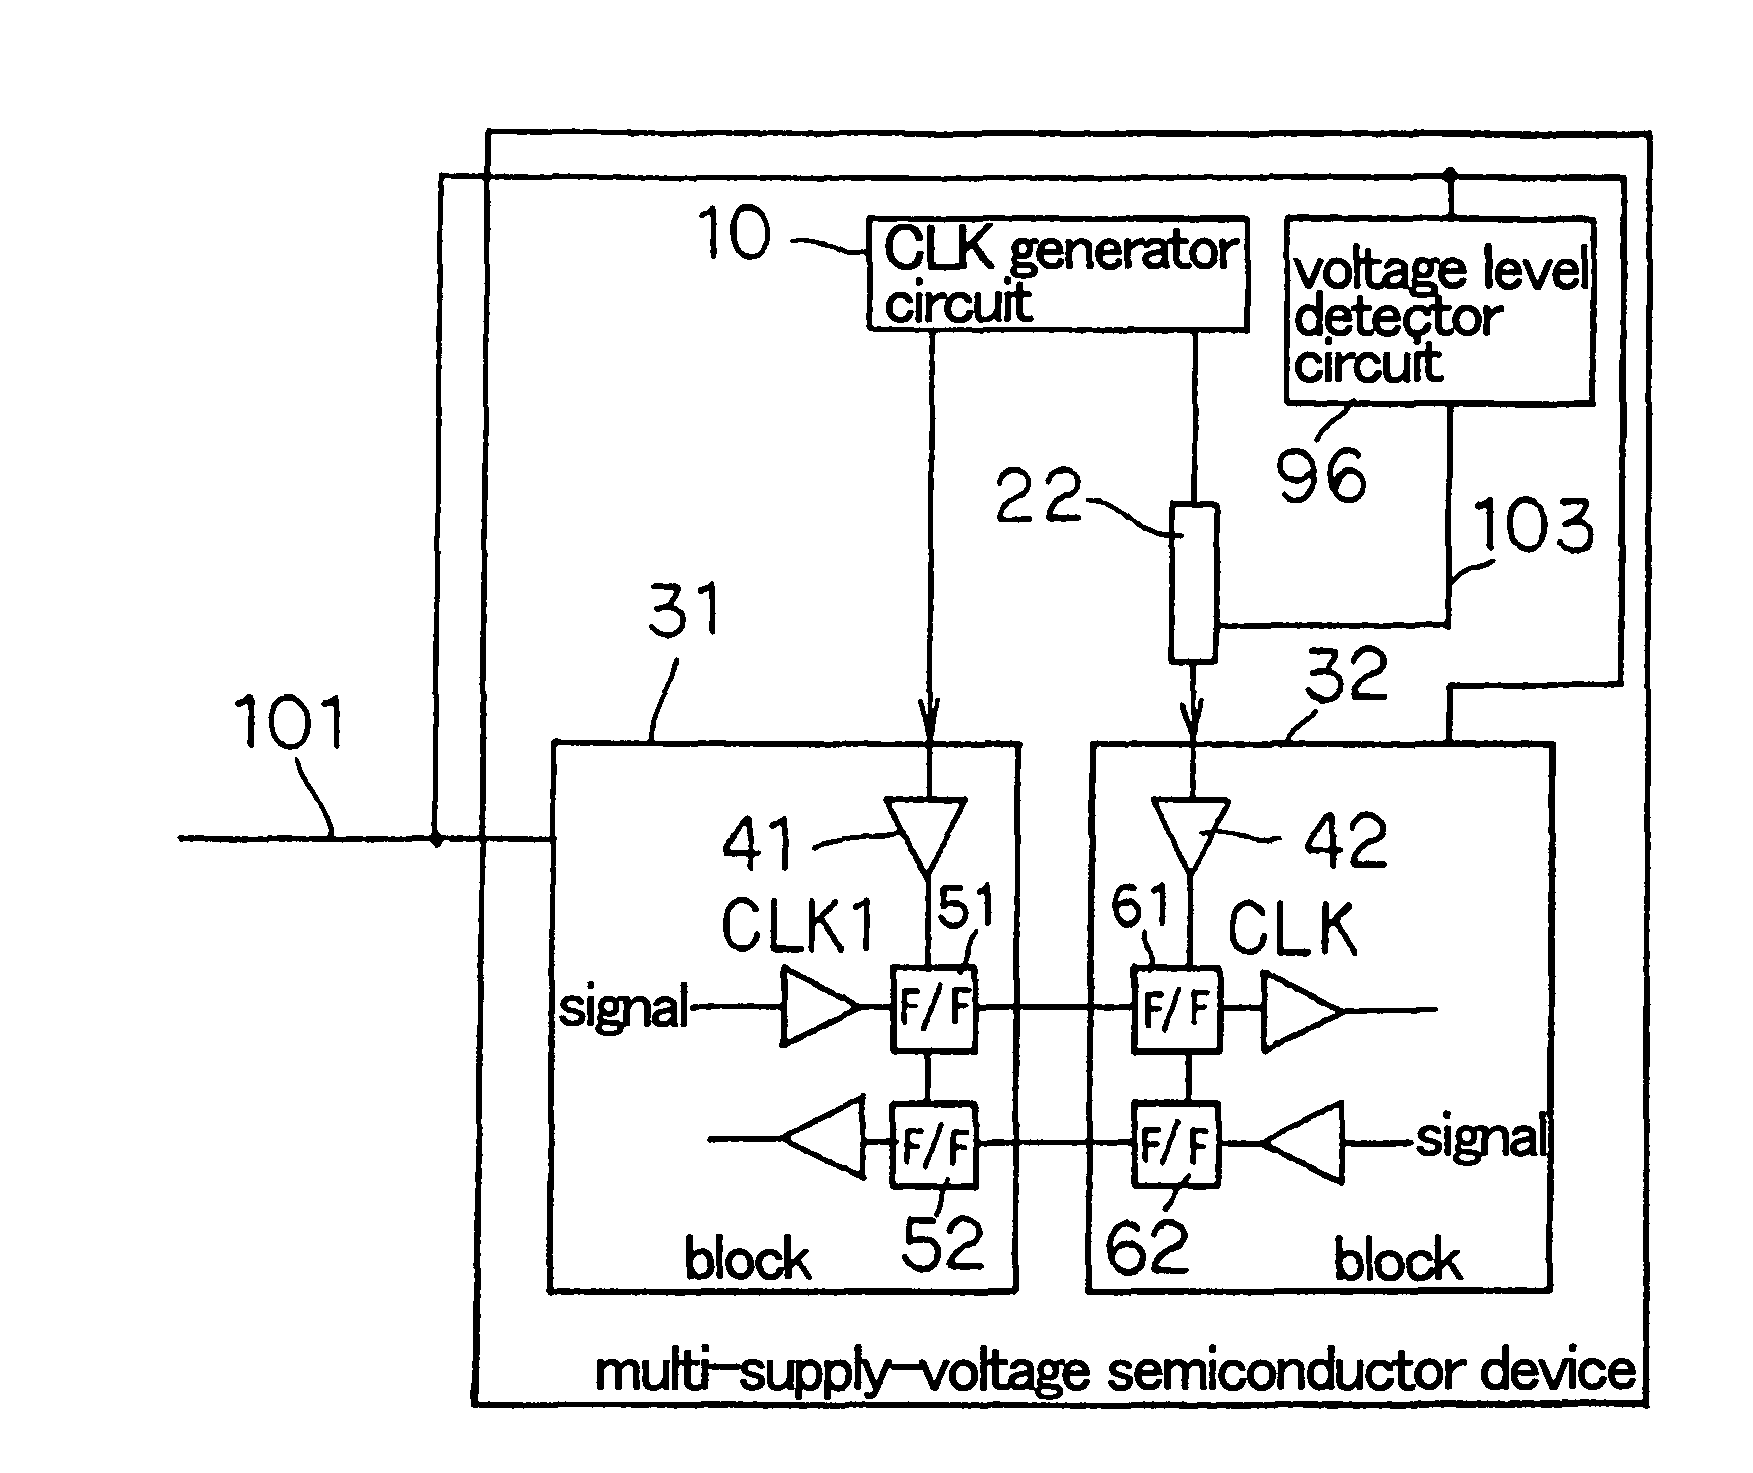 Multi-power source semiconductor device